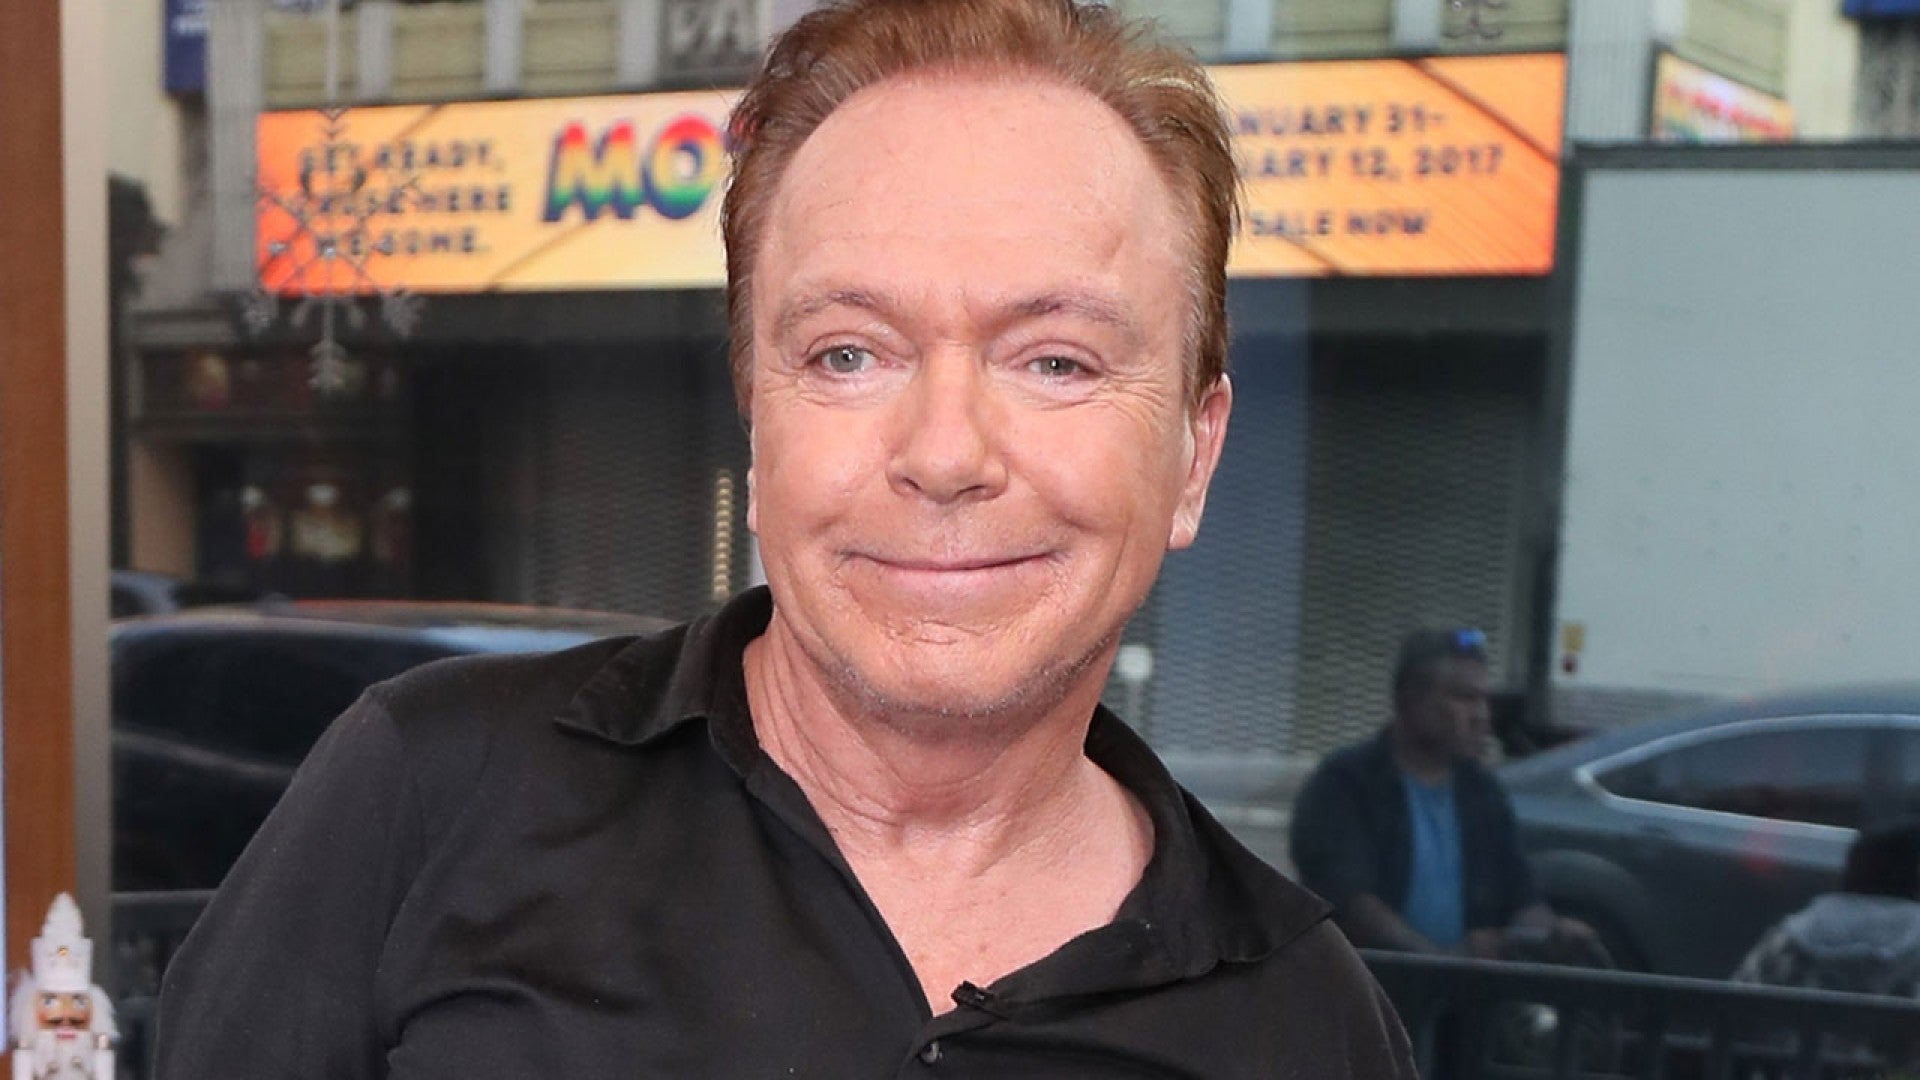 David Cassidy Admits Hes Battling Dementia Says He Always Knew The Diagnosis Was Coming